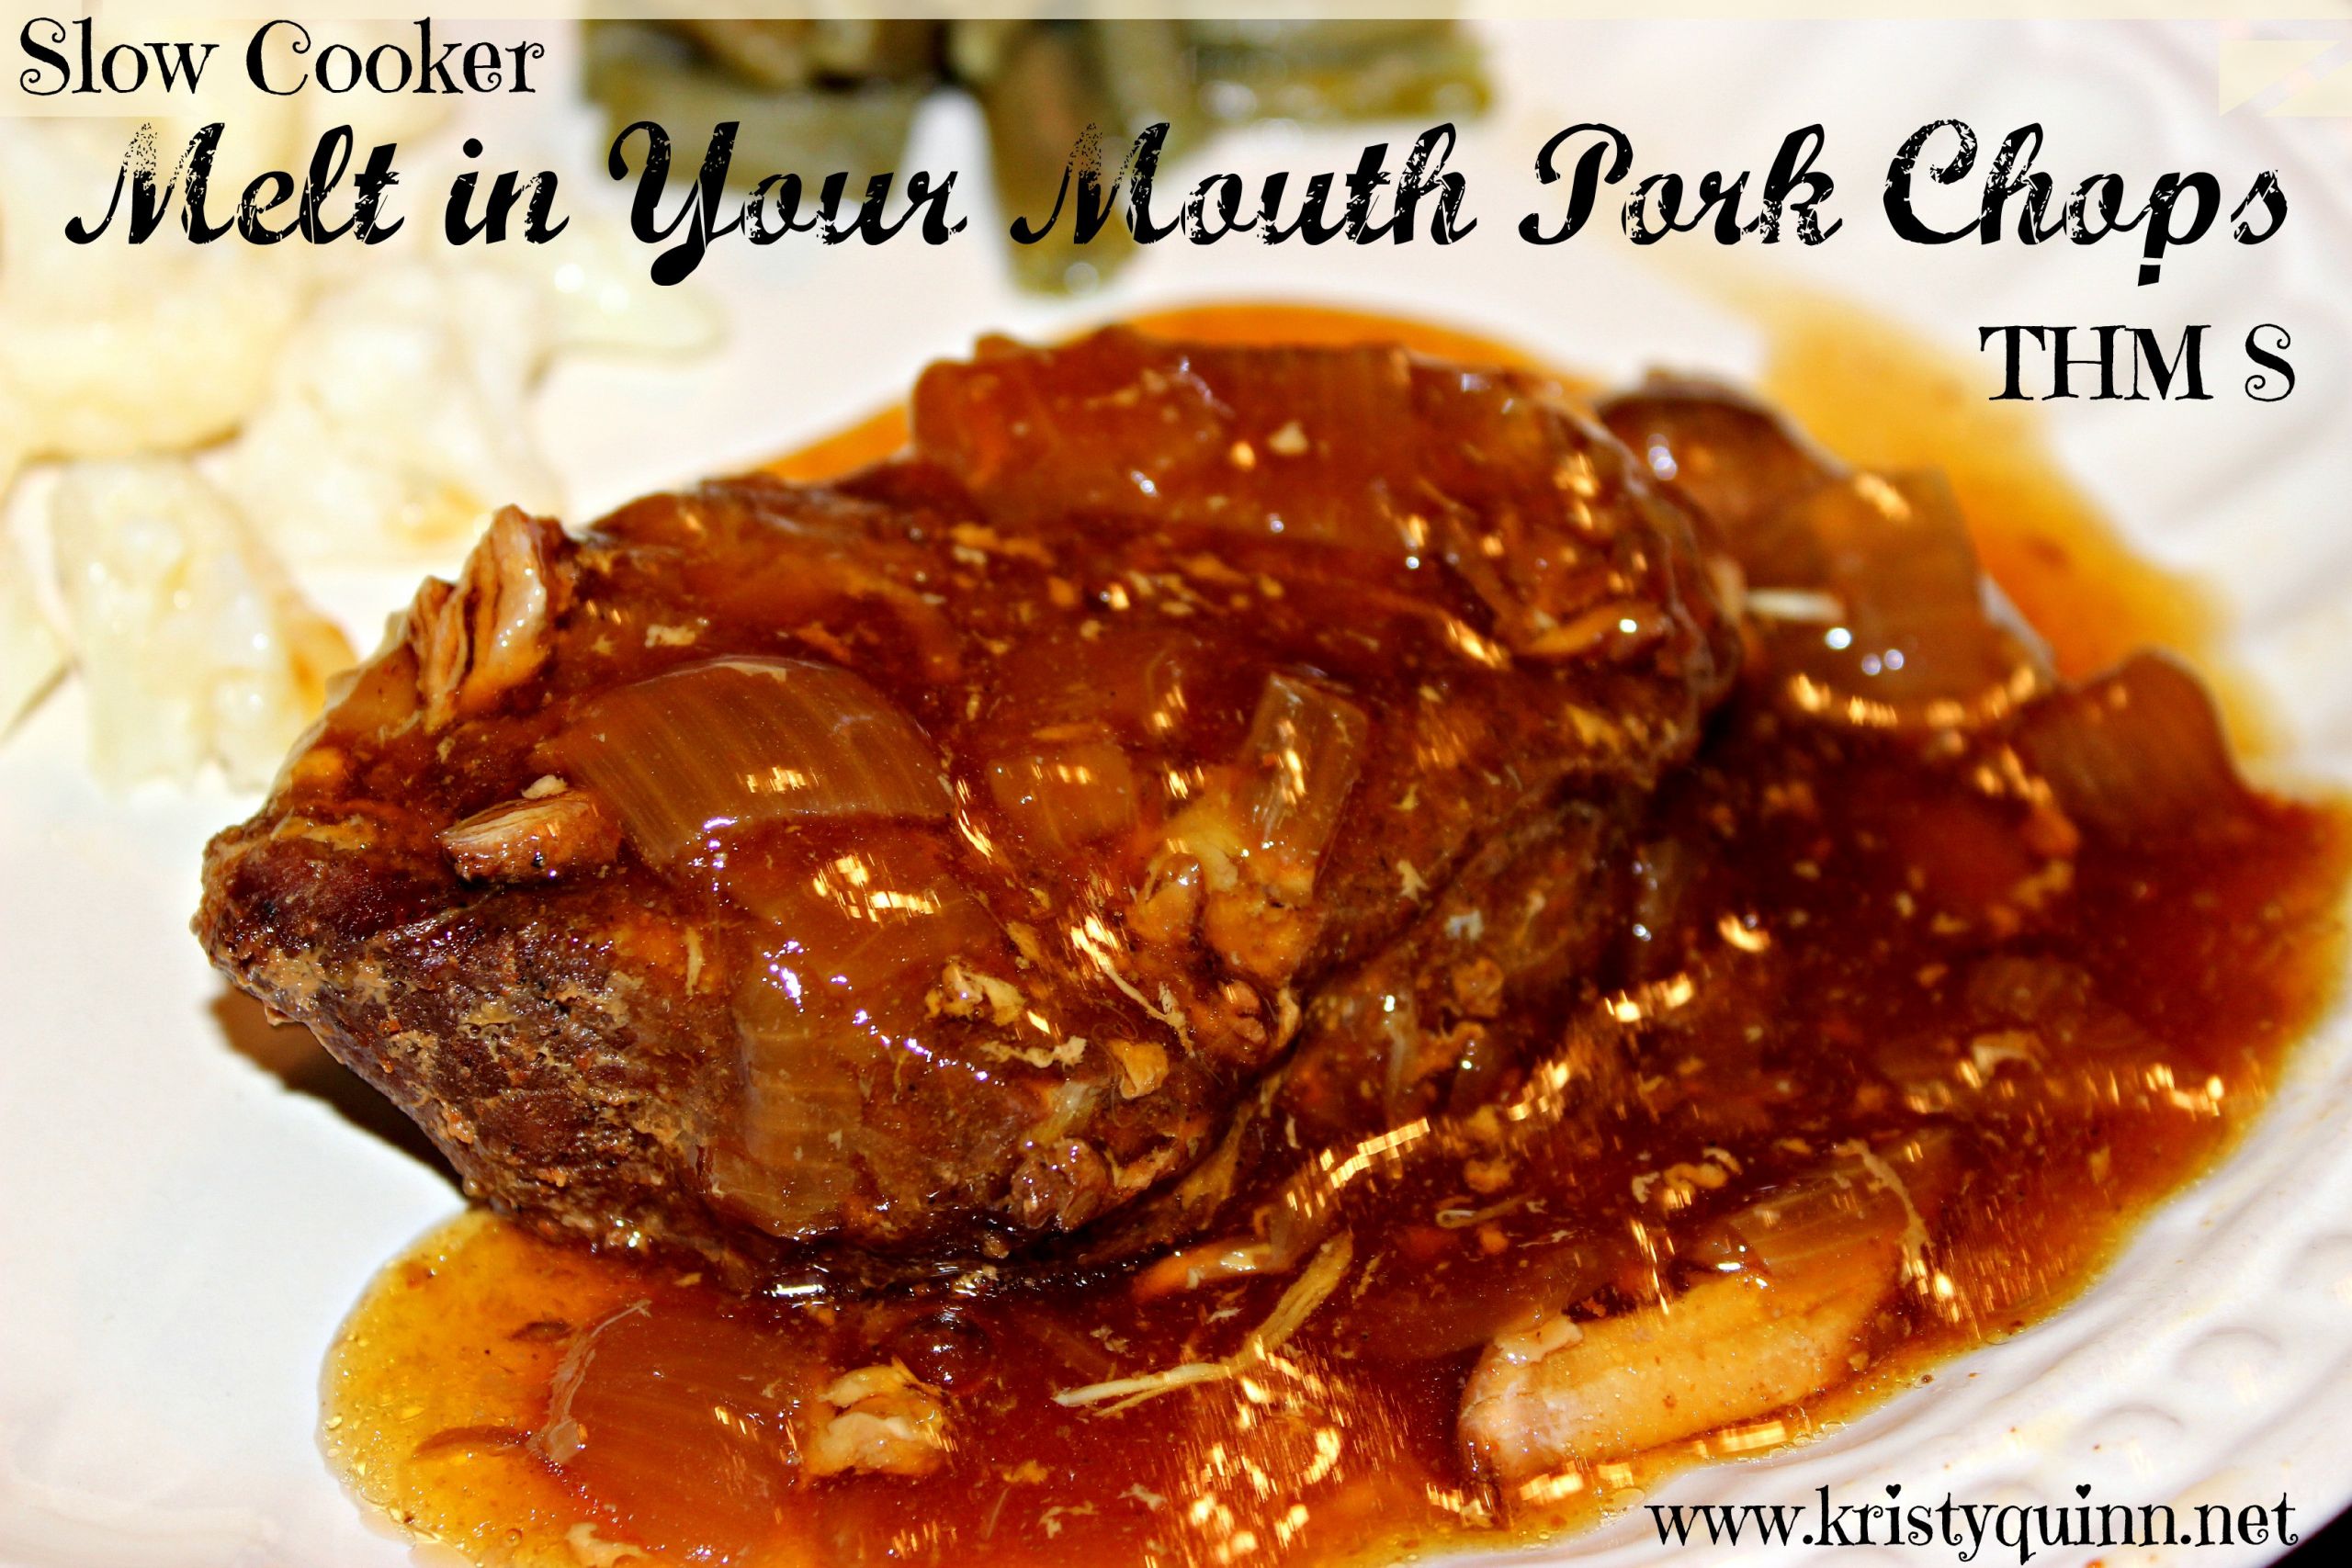 Pork Chops Slow Cooker Recipes
 Slow Cooker Melt in Your Mouth Pork Chops THM S